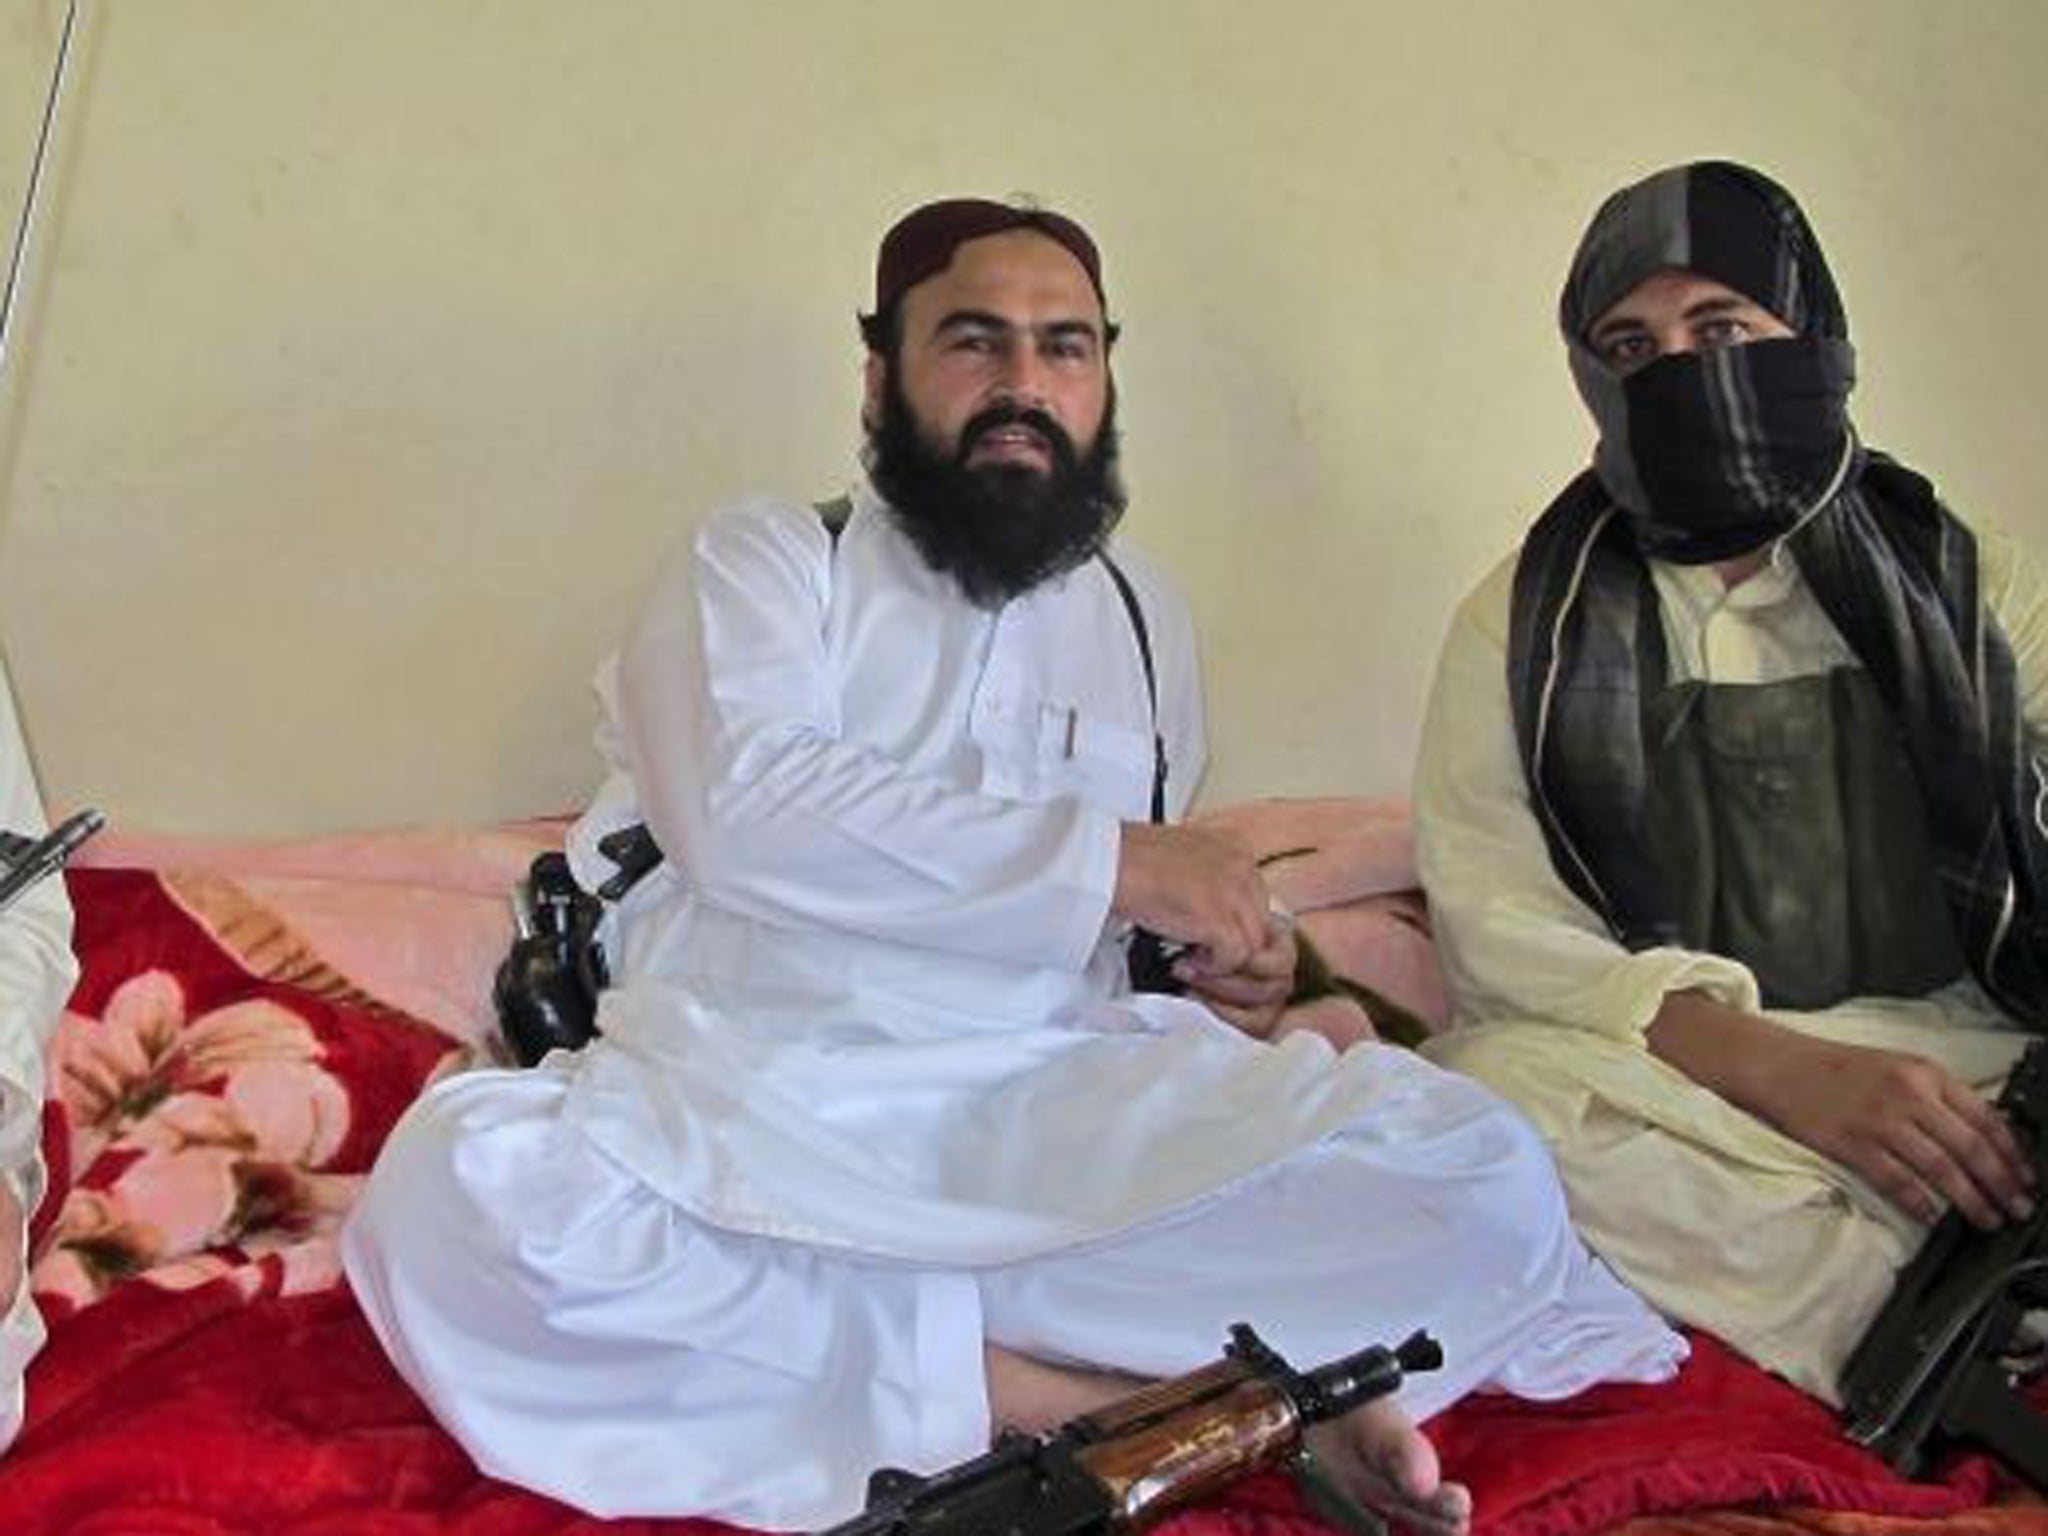 Deputy Pakistani Taliban leader Wali-ur-Rehman, left, is reported to be among the dead